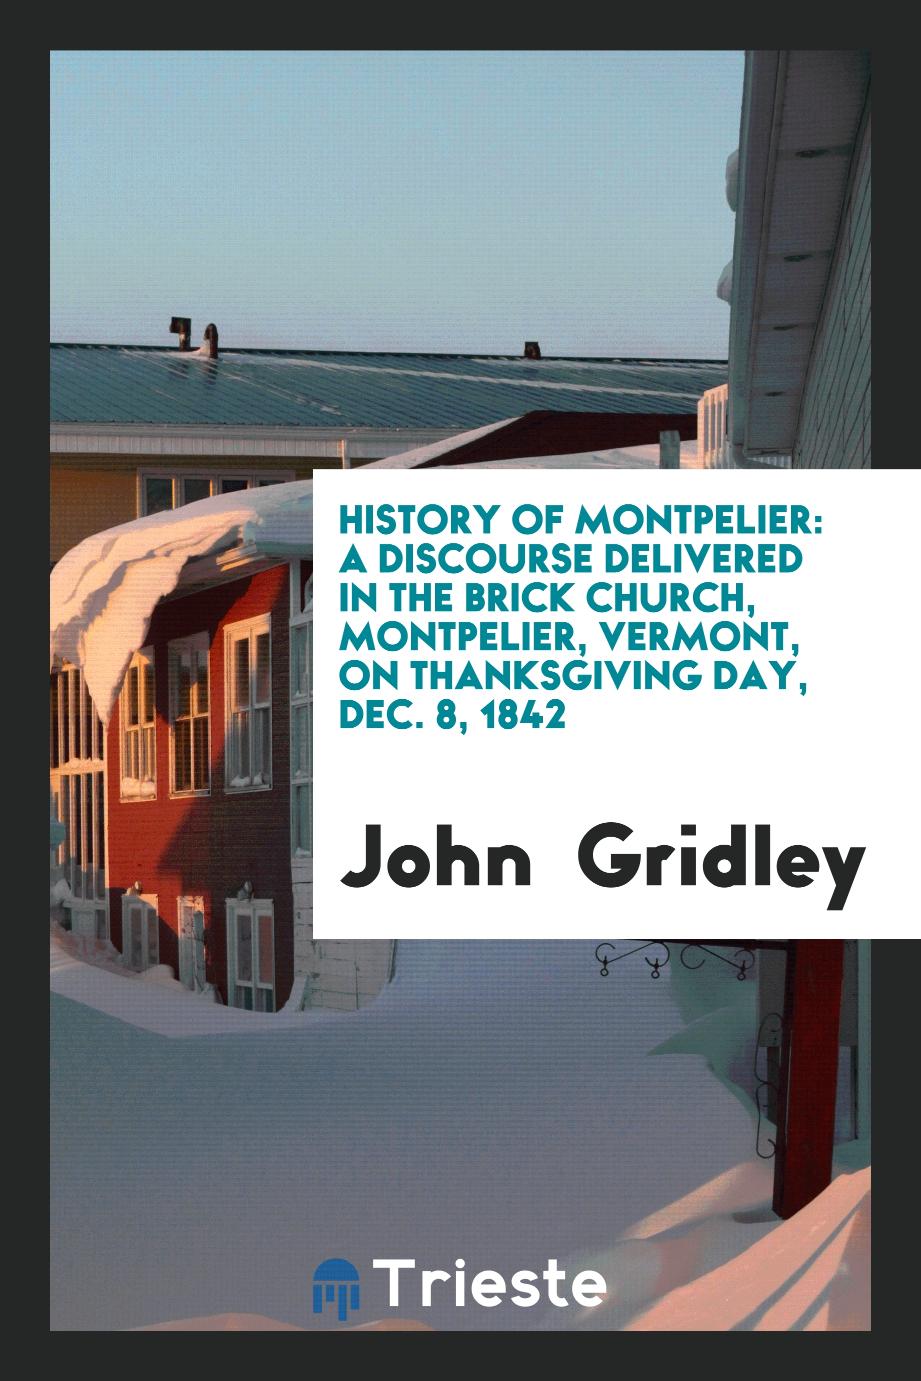 History of Montpelier: A Discourse Delivered in the Brick Church, Montpelier, Vermont, on Thanksgiving Day, Dec. 8, 1842